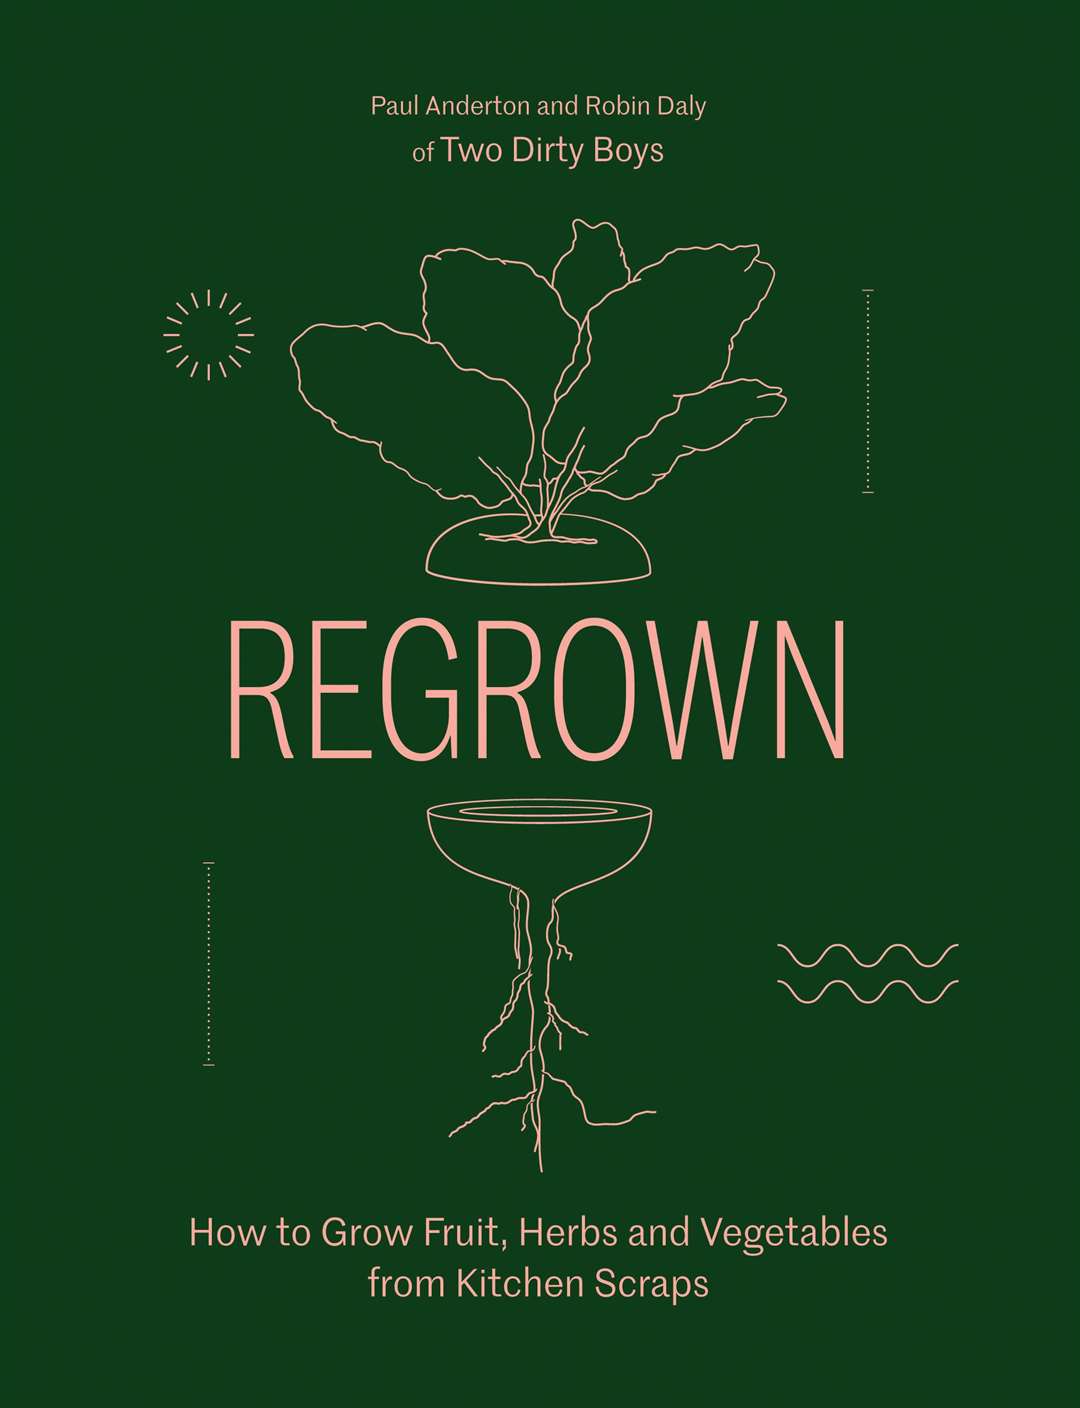 Regrown by Paul Anderton and Rob Daly.